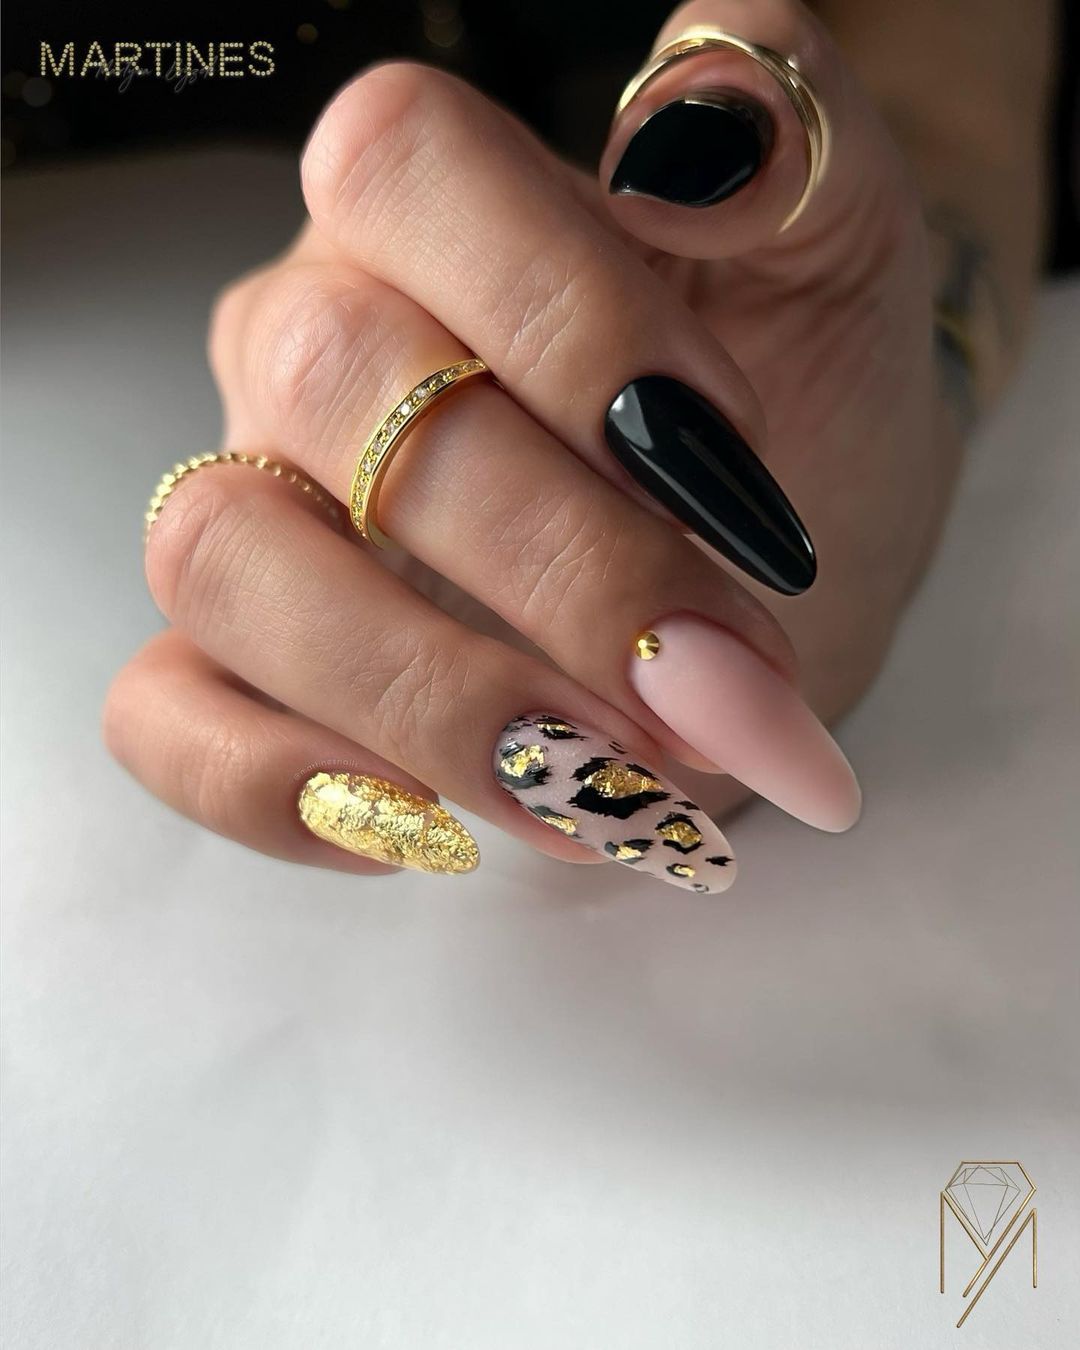 Black Glossy Nails with Gold Foil Design